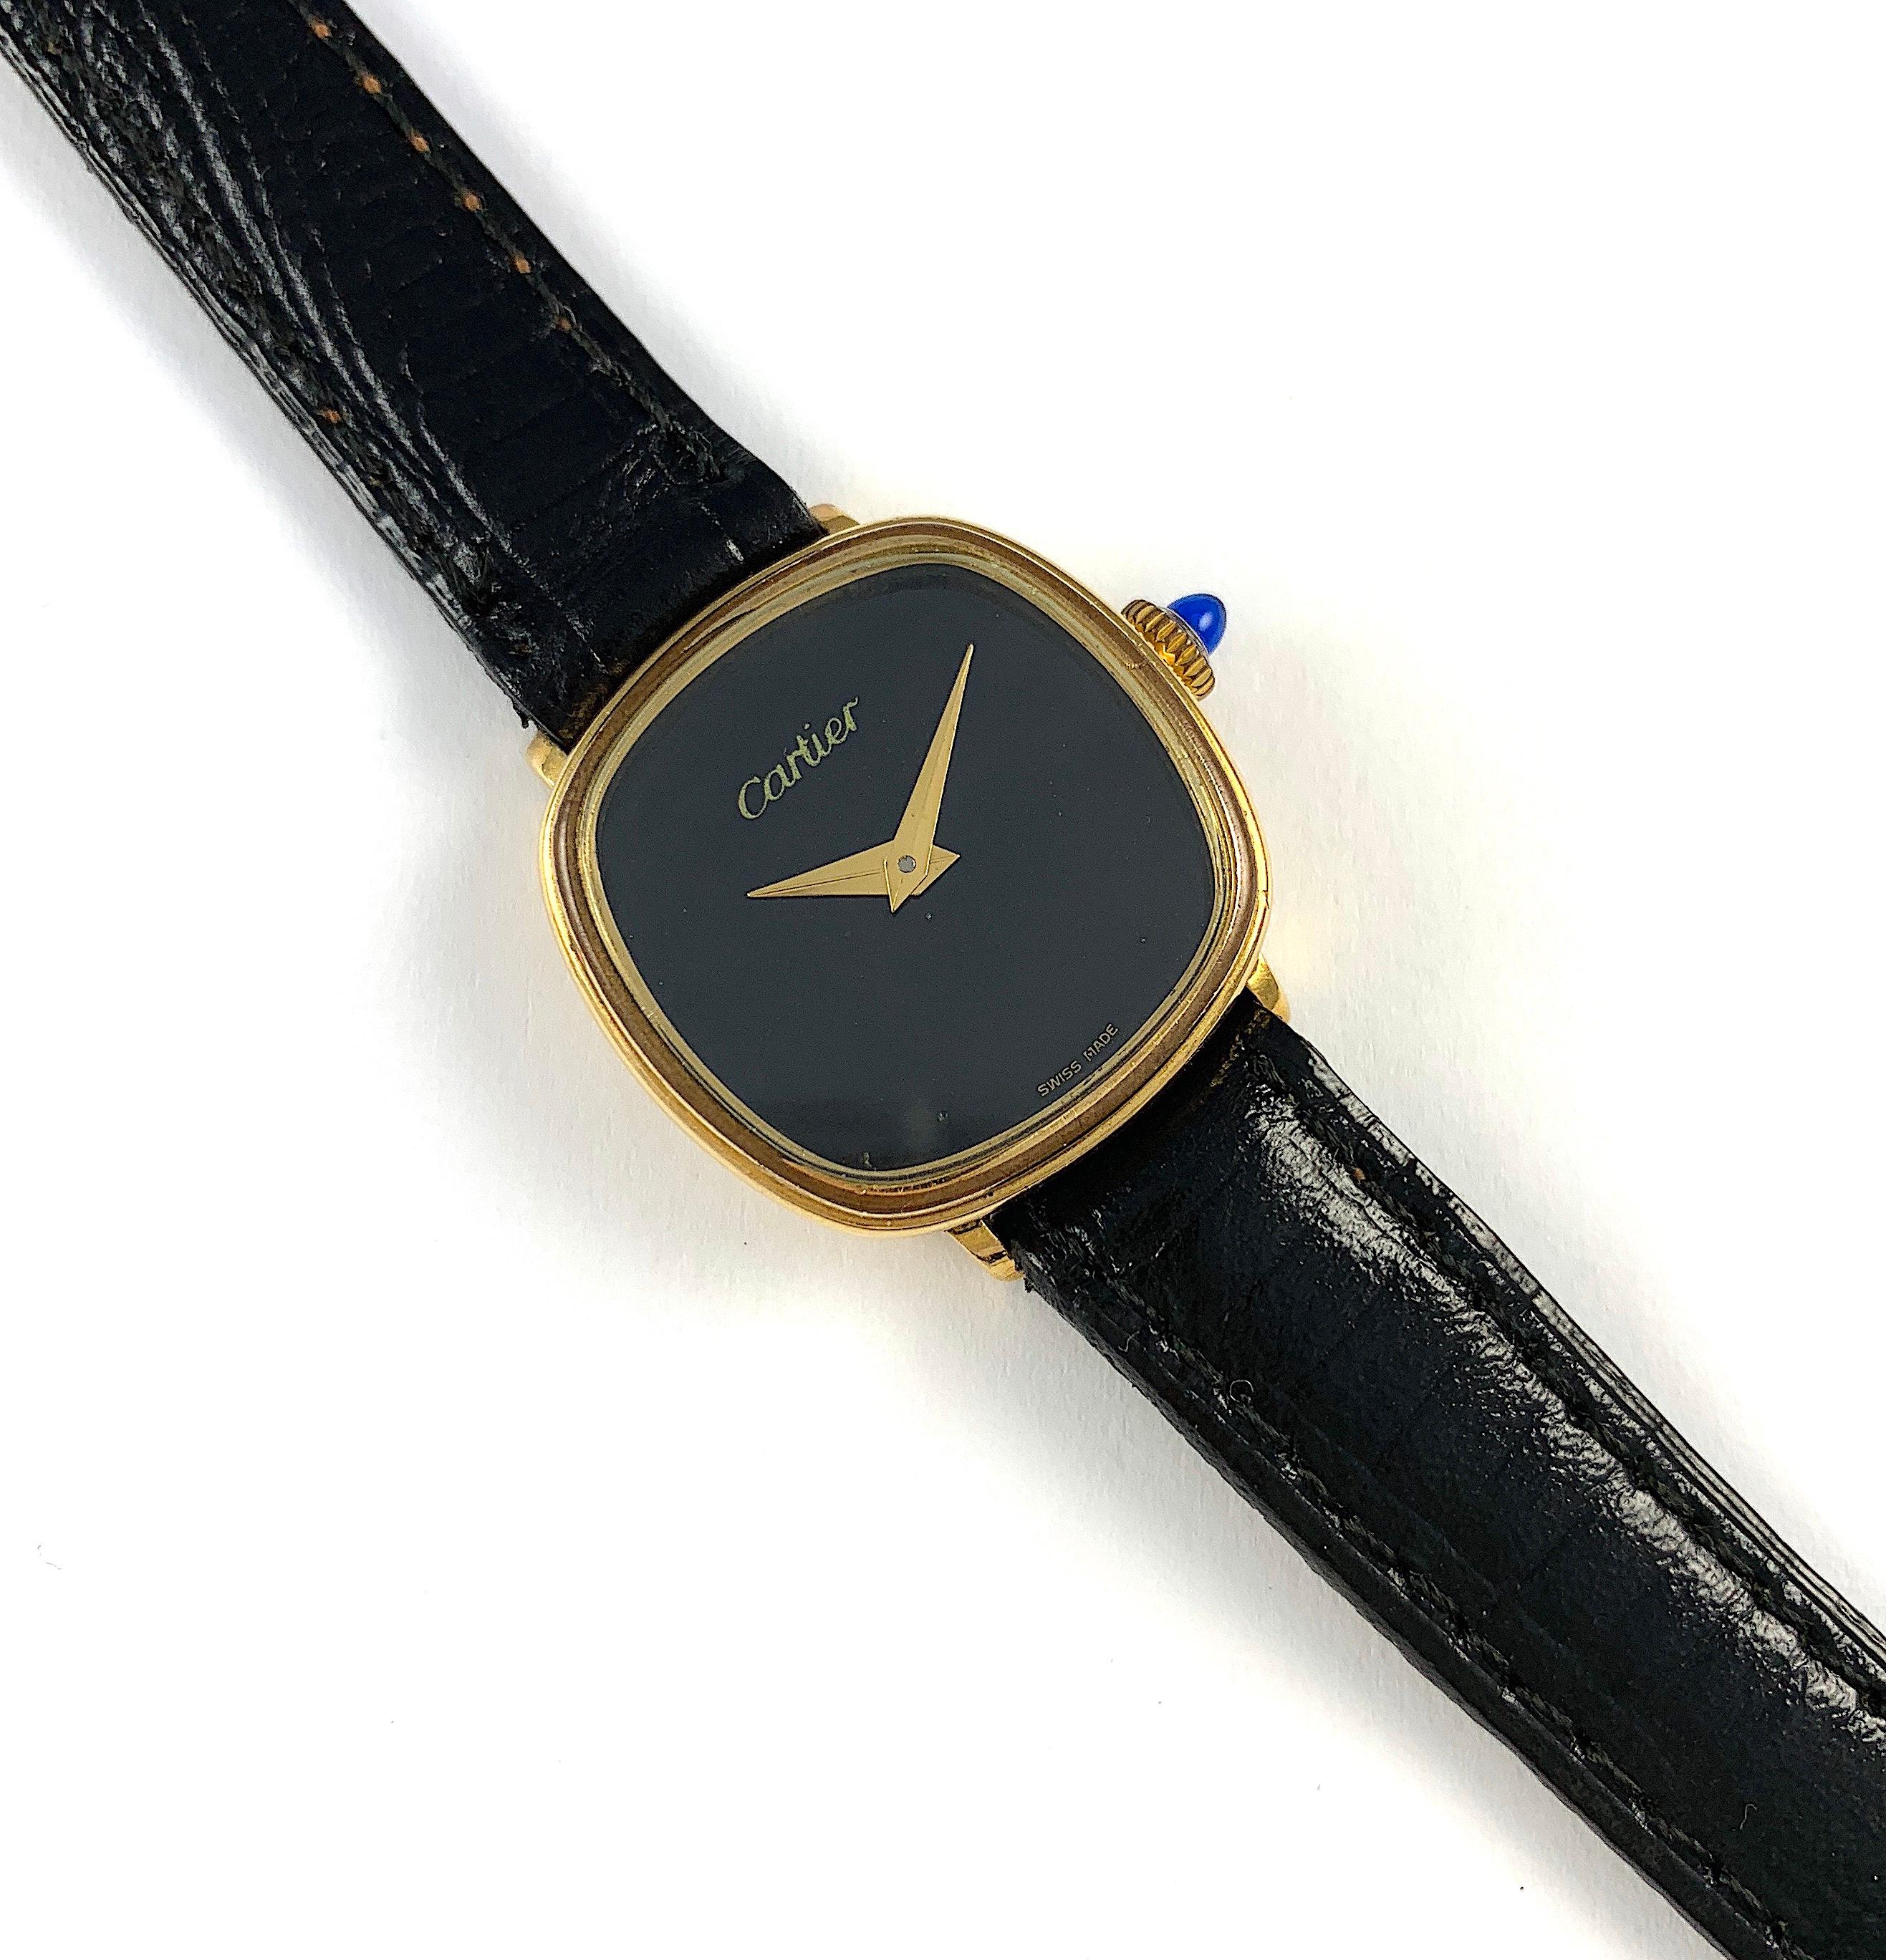 Cartier Cushion Shaped Manual Wind Electroplated Watch
Black Onyx Swiss Made Cartier Dial
Manual Wind Movement
18K Gold Electroplated Signed Cartier Case
Blue Cabochon Crown
Generic Black Strap
Approximately 24mm x 24mm
Some Light Fading of Gold